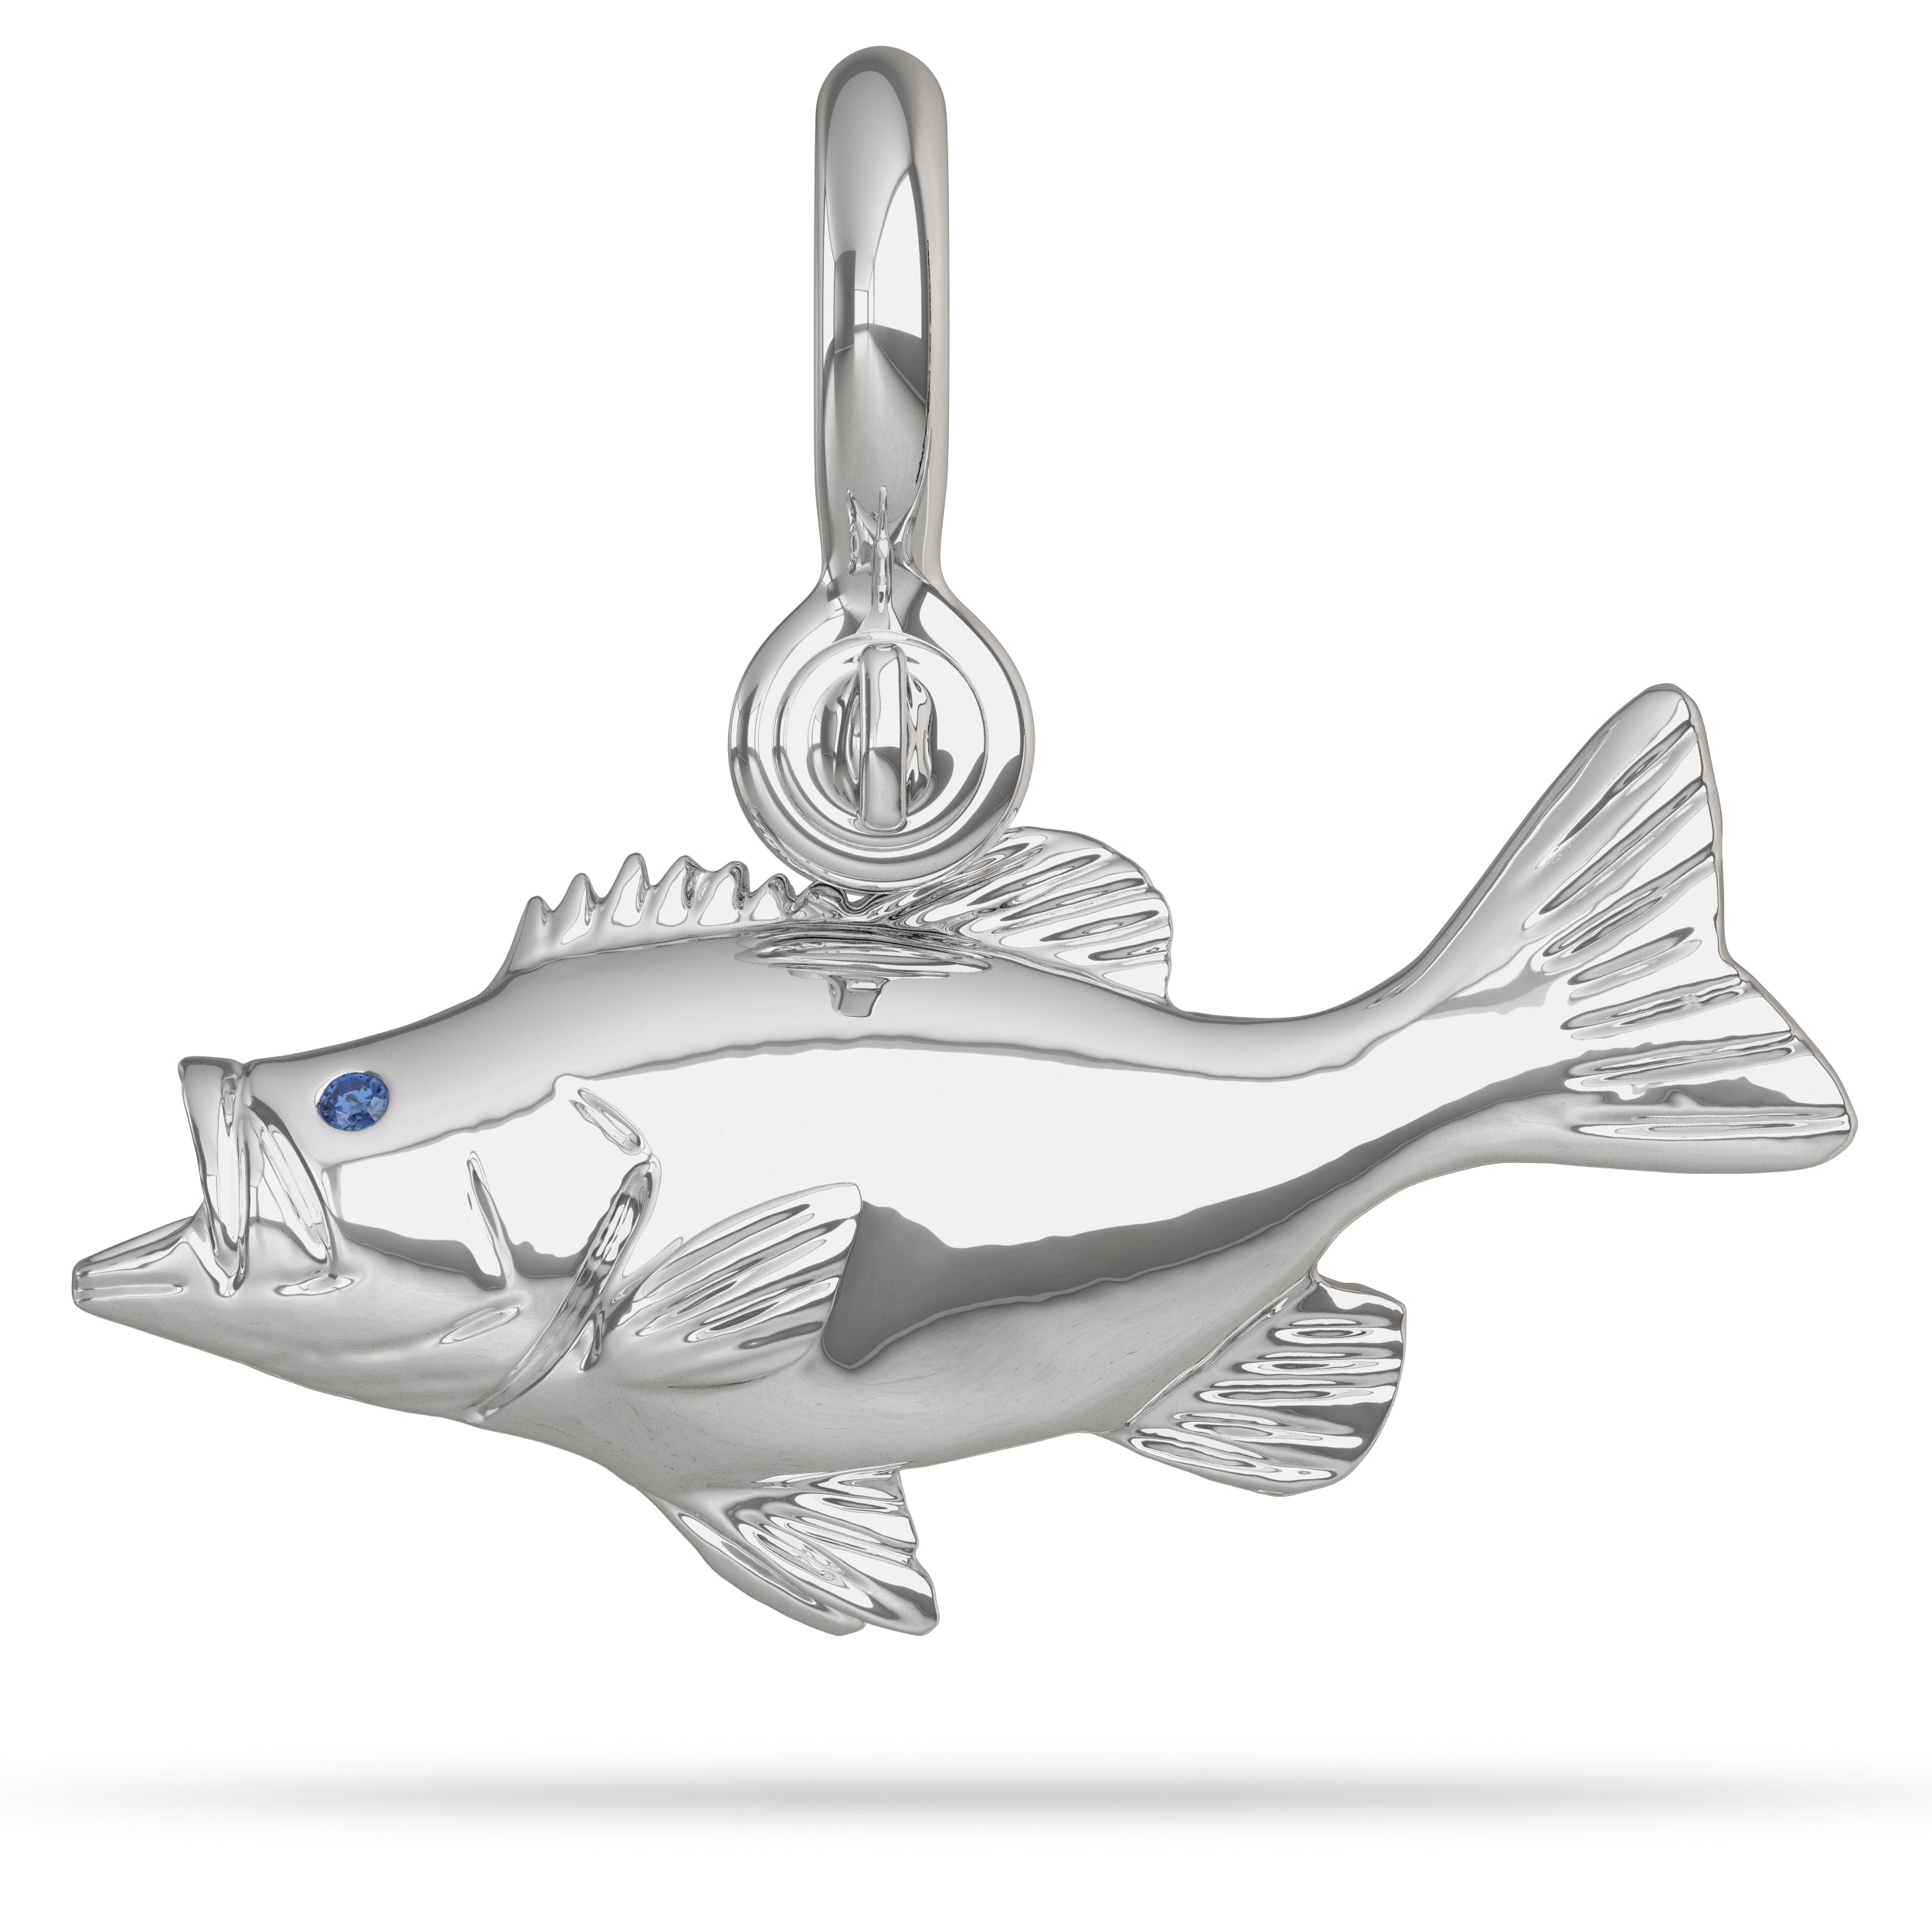 Sterling Silver Largemouth Bass Pendant High Polished Mirror Finish With Blue Sapphire Eye with A Mariner Shackle Bail Custom Designed By Nautical Treasure Jewelry In The Florida Keys 